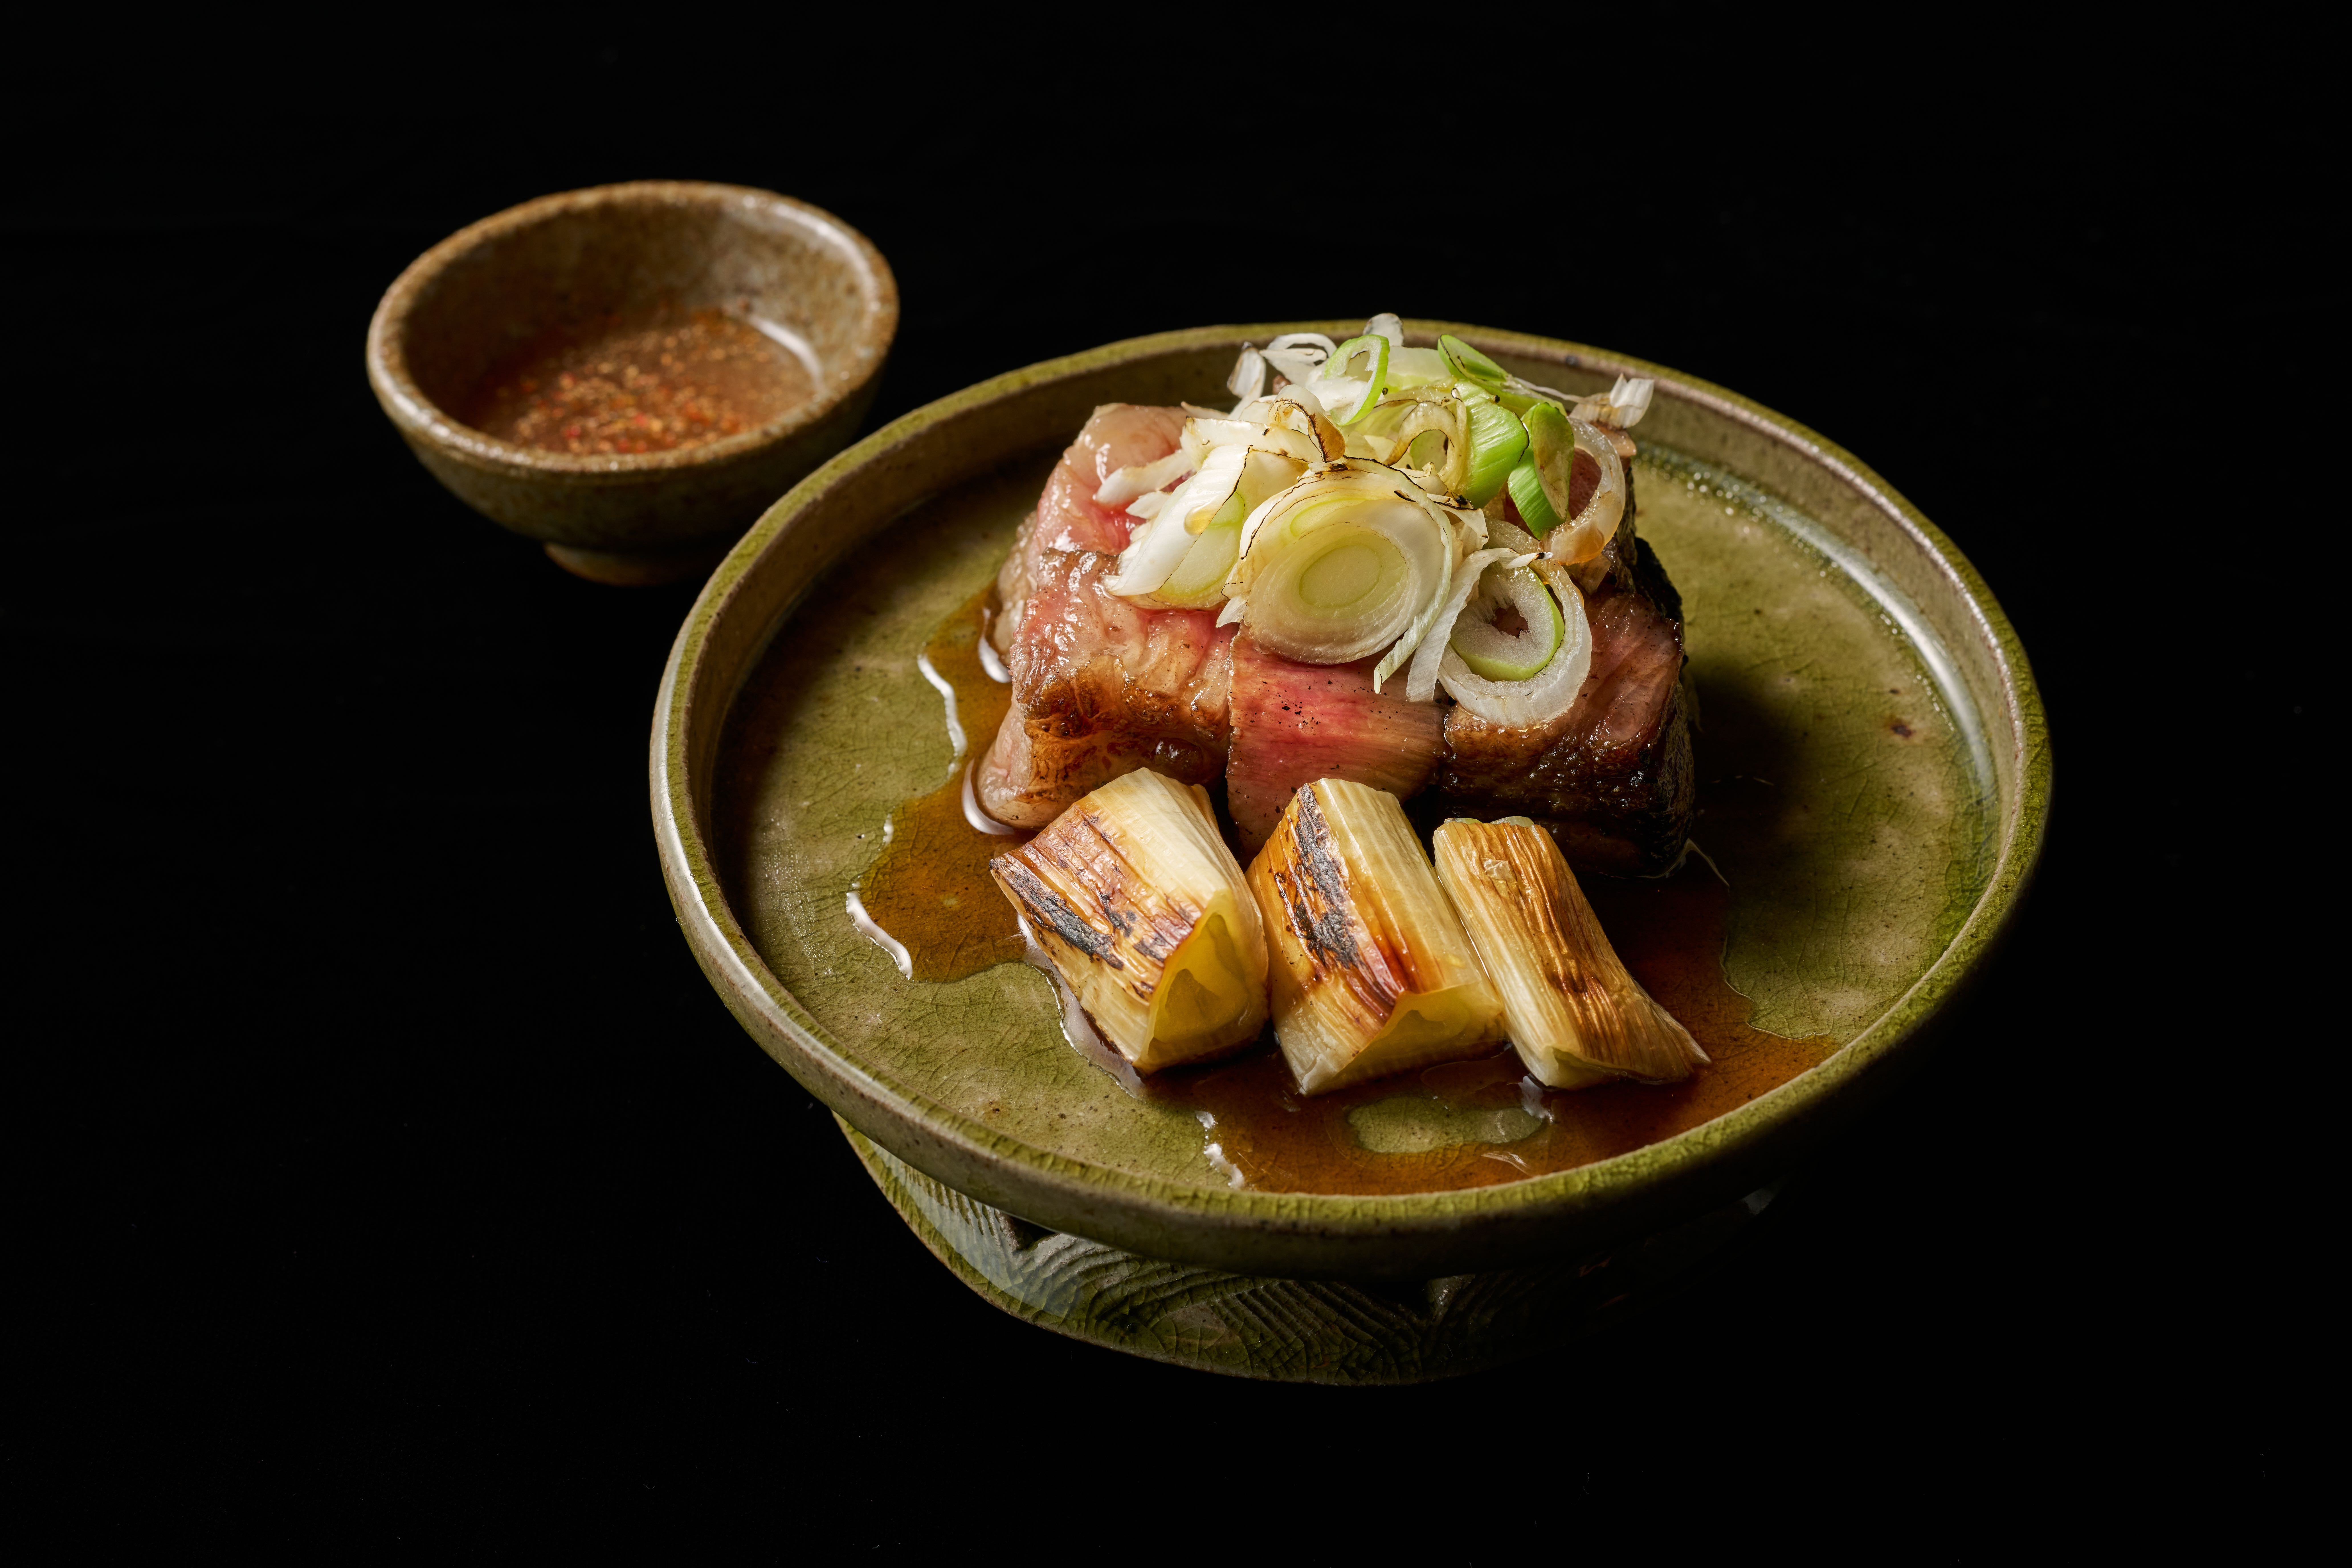 Okamura Wagyu beef belly grilled with a special sauce